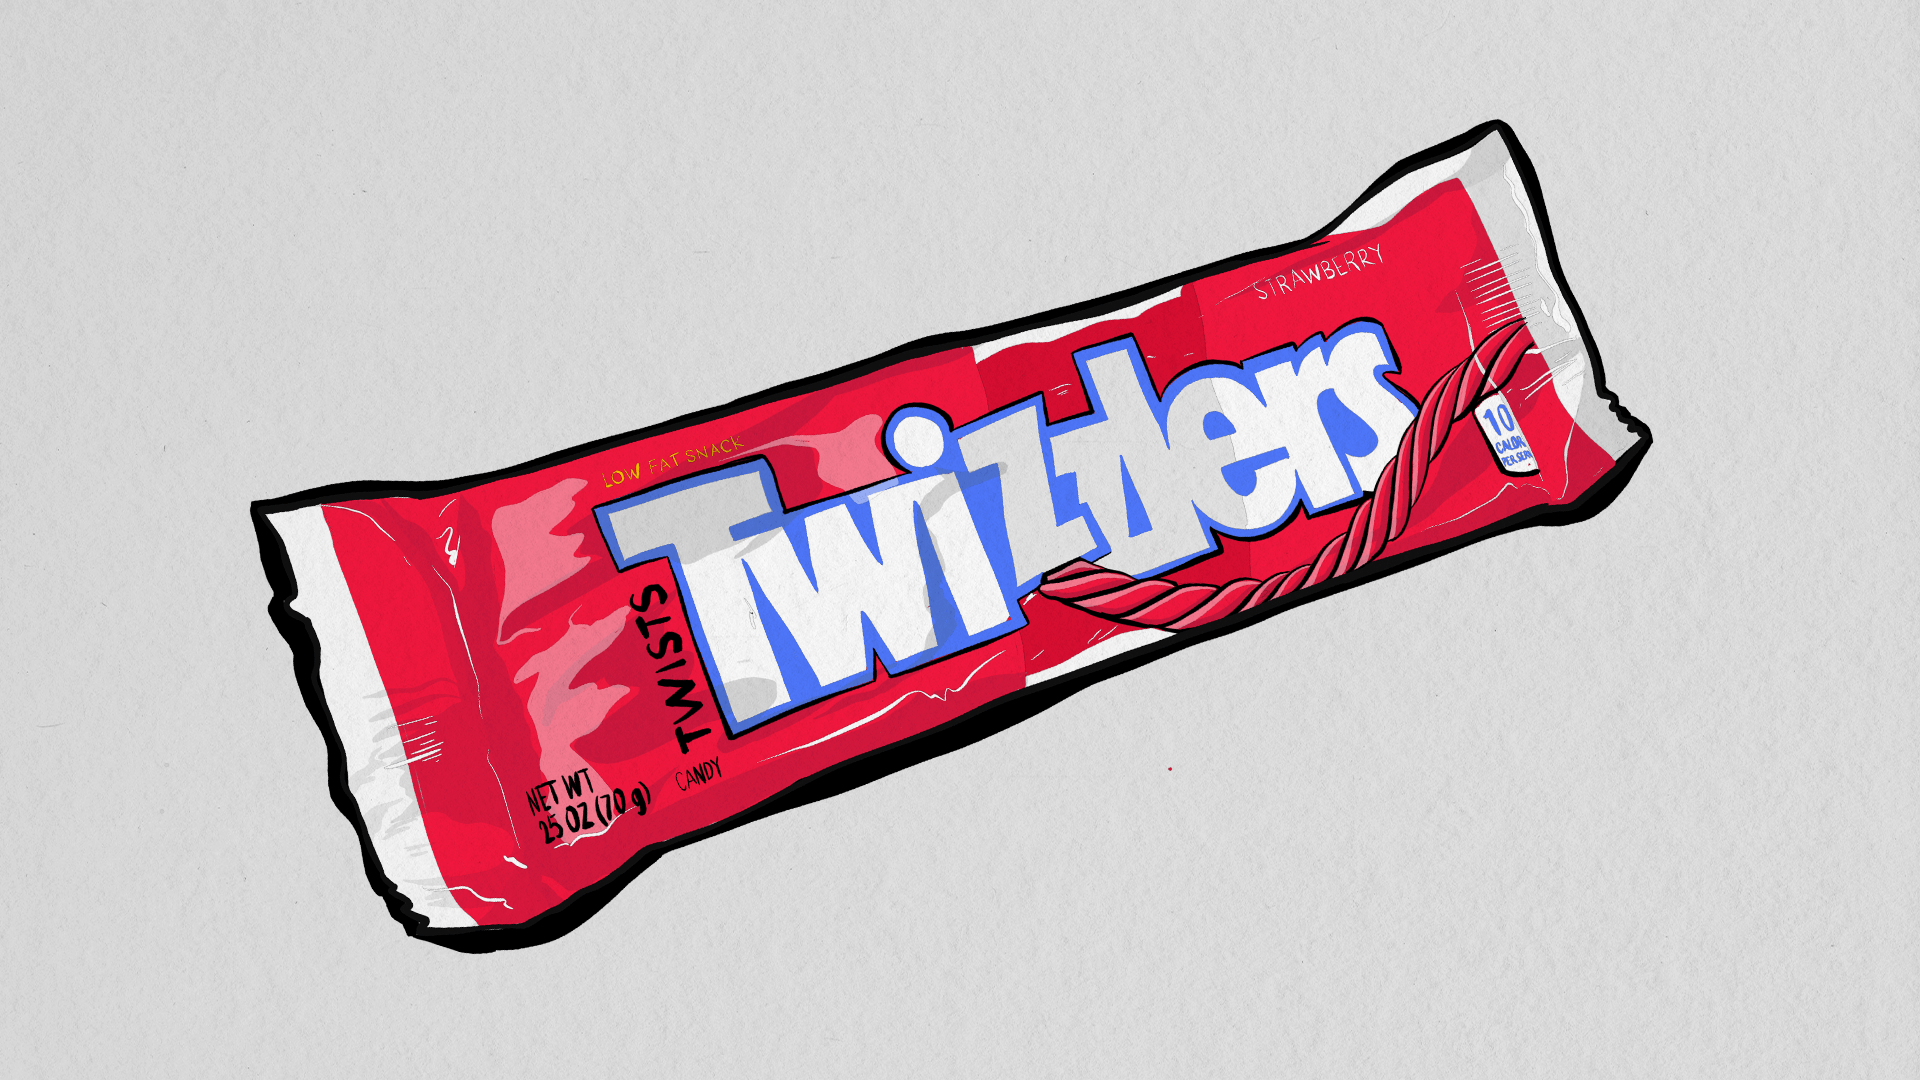 CandyisDandy_Drawings_0008_Twizzlers-min.png